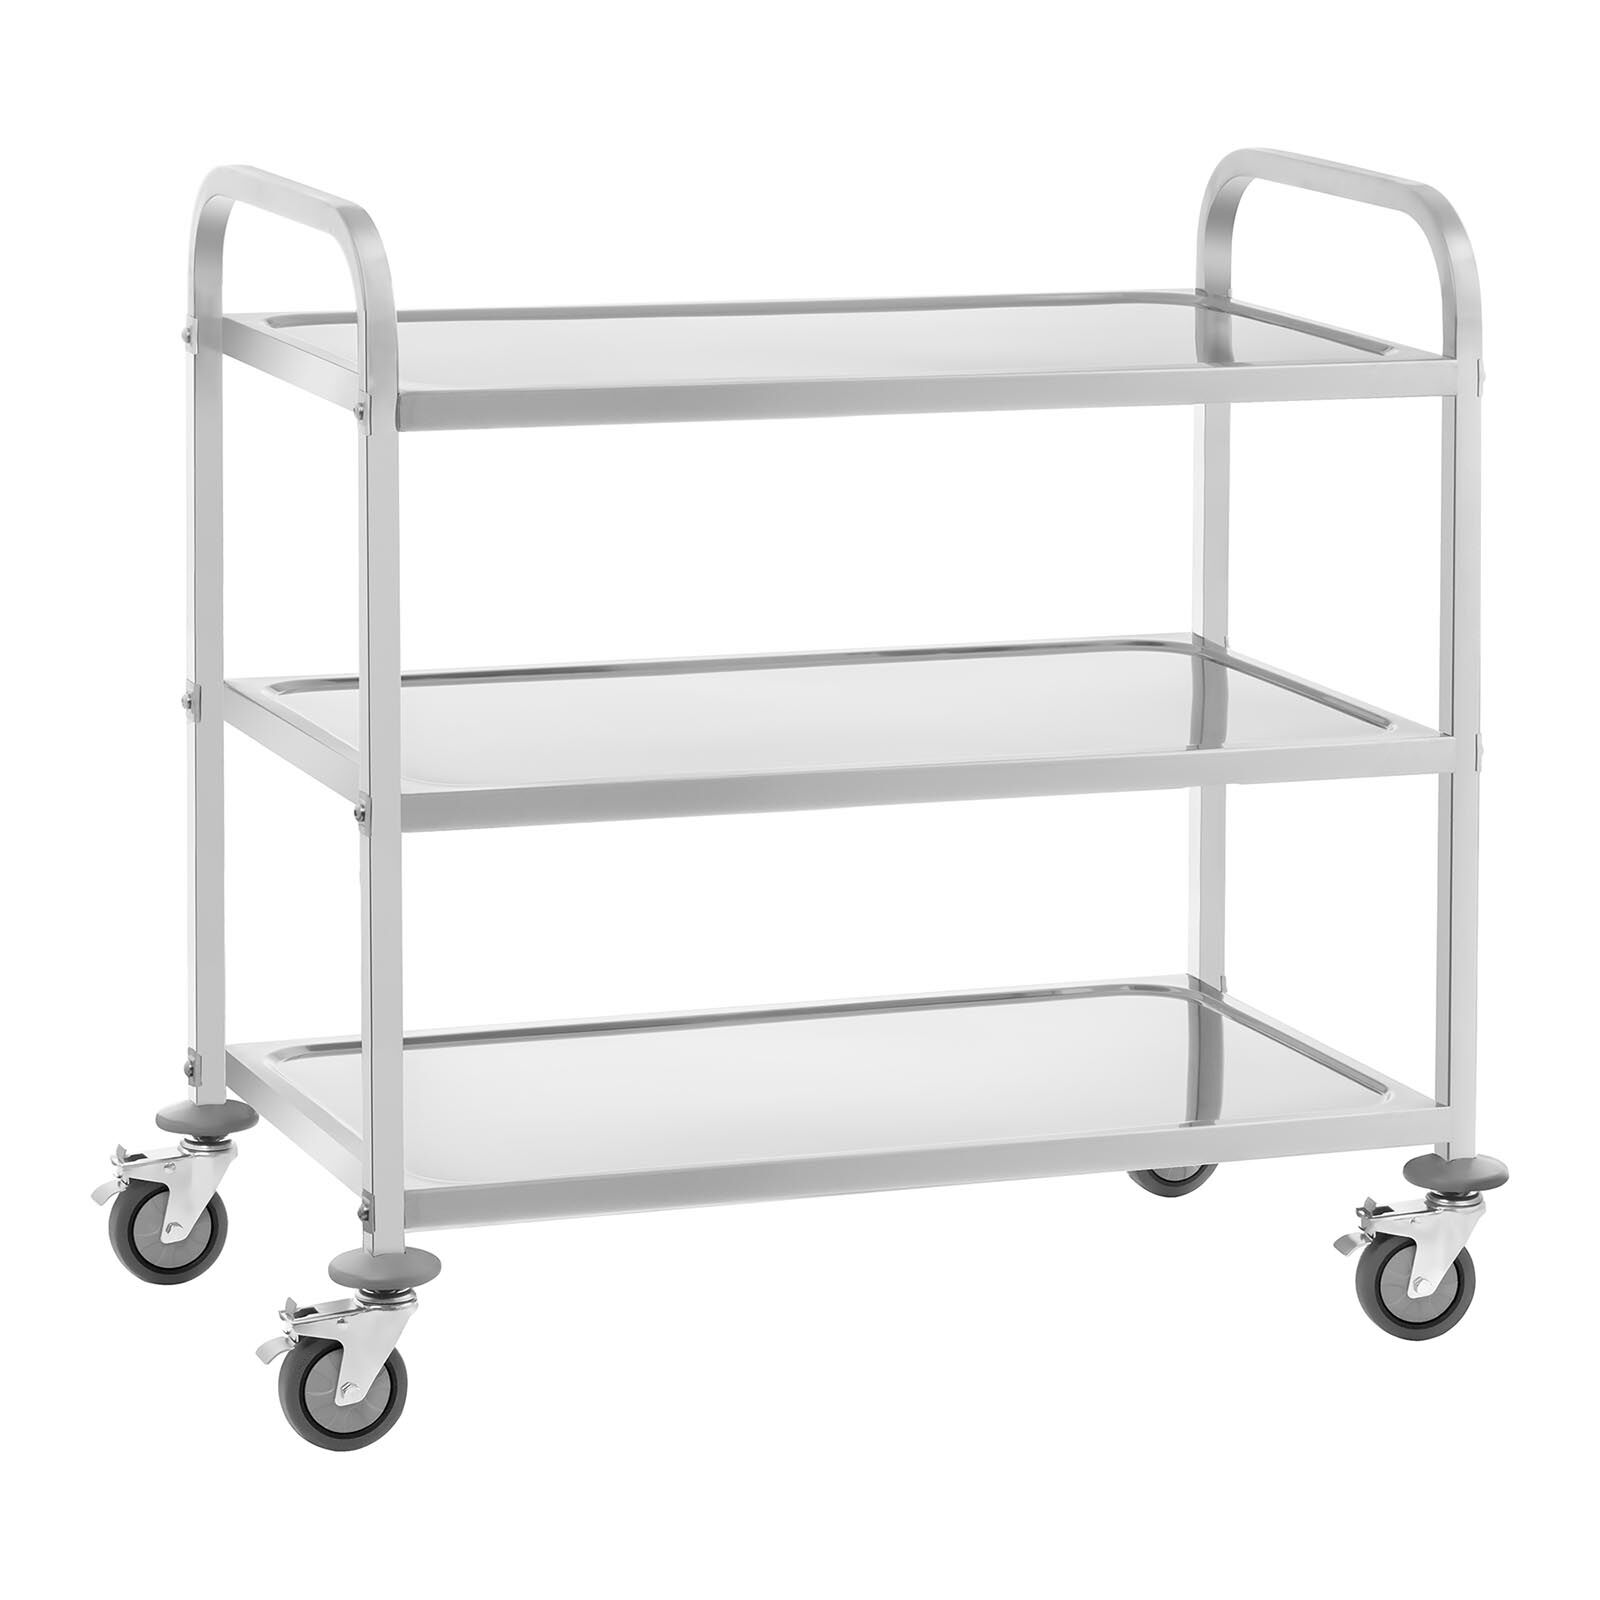 Royal Catering Serving Trolley - Stainless Steel - 3 Troughs - Up to 150 kg - 2 Brakes